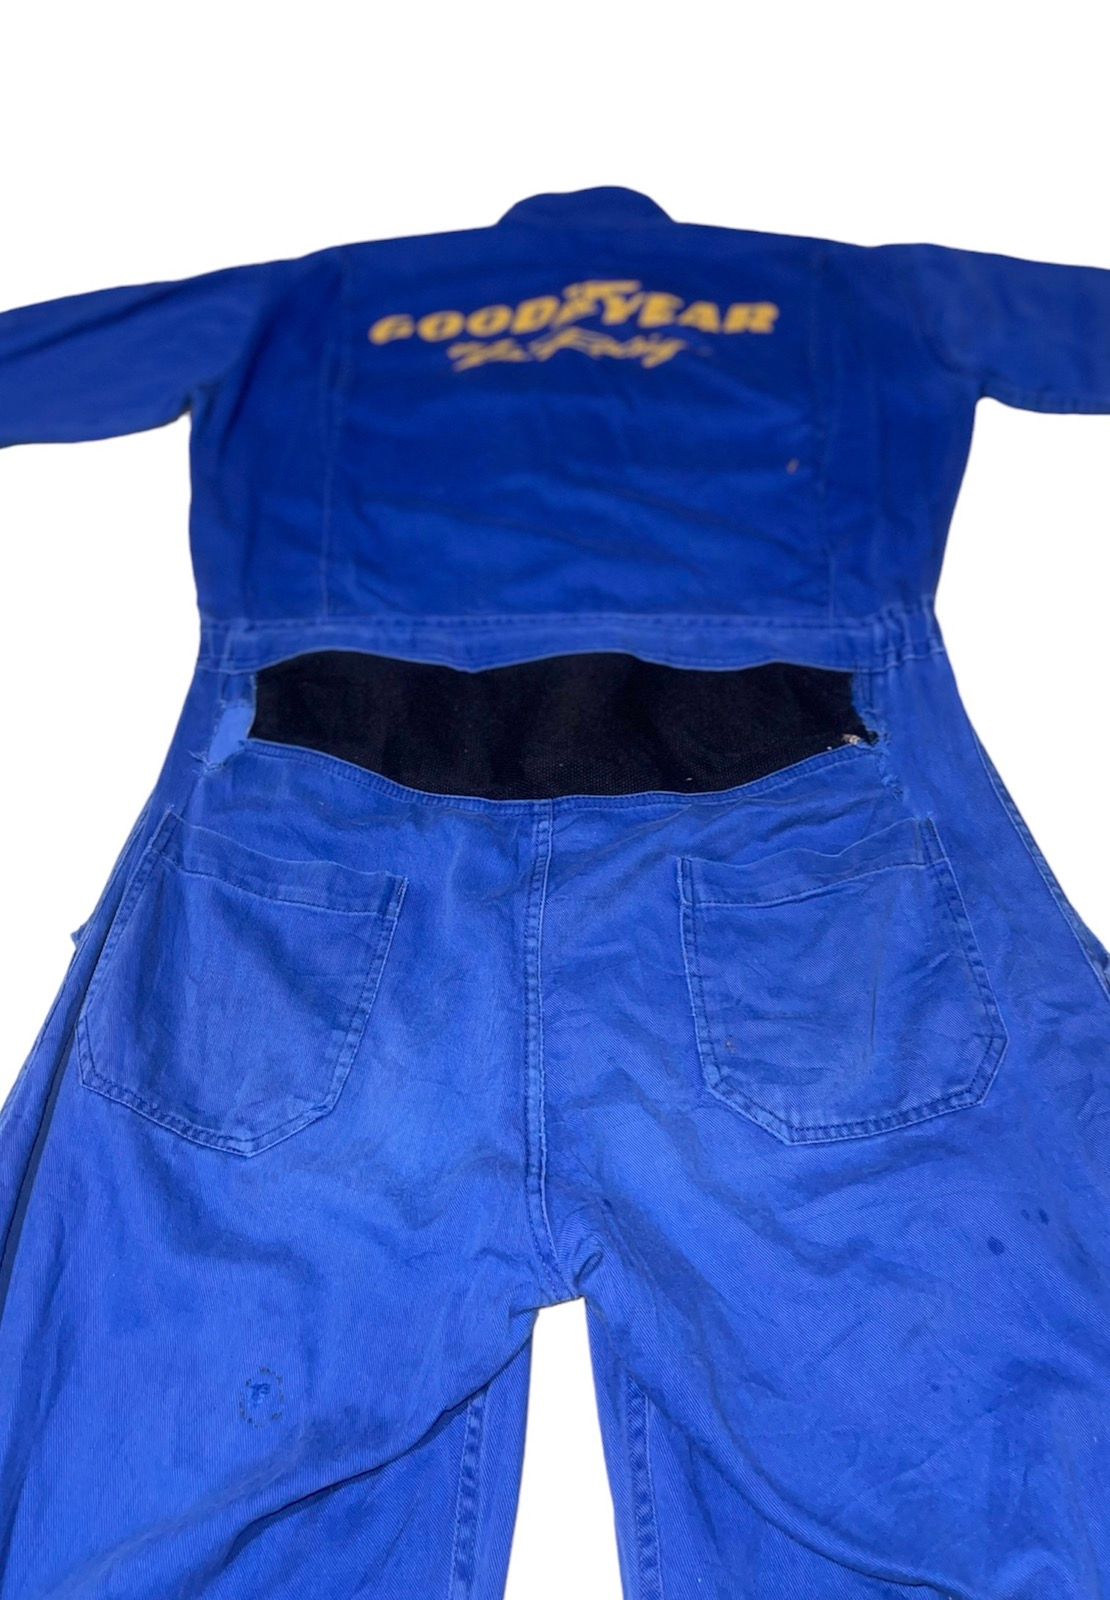 VINTAGE GOOD YEAR RACING OVERALL JUMPSUIT - 9